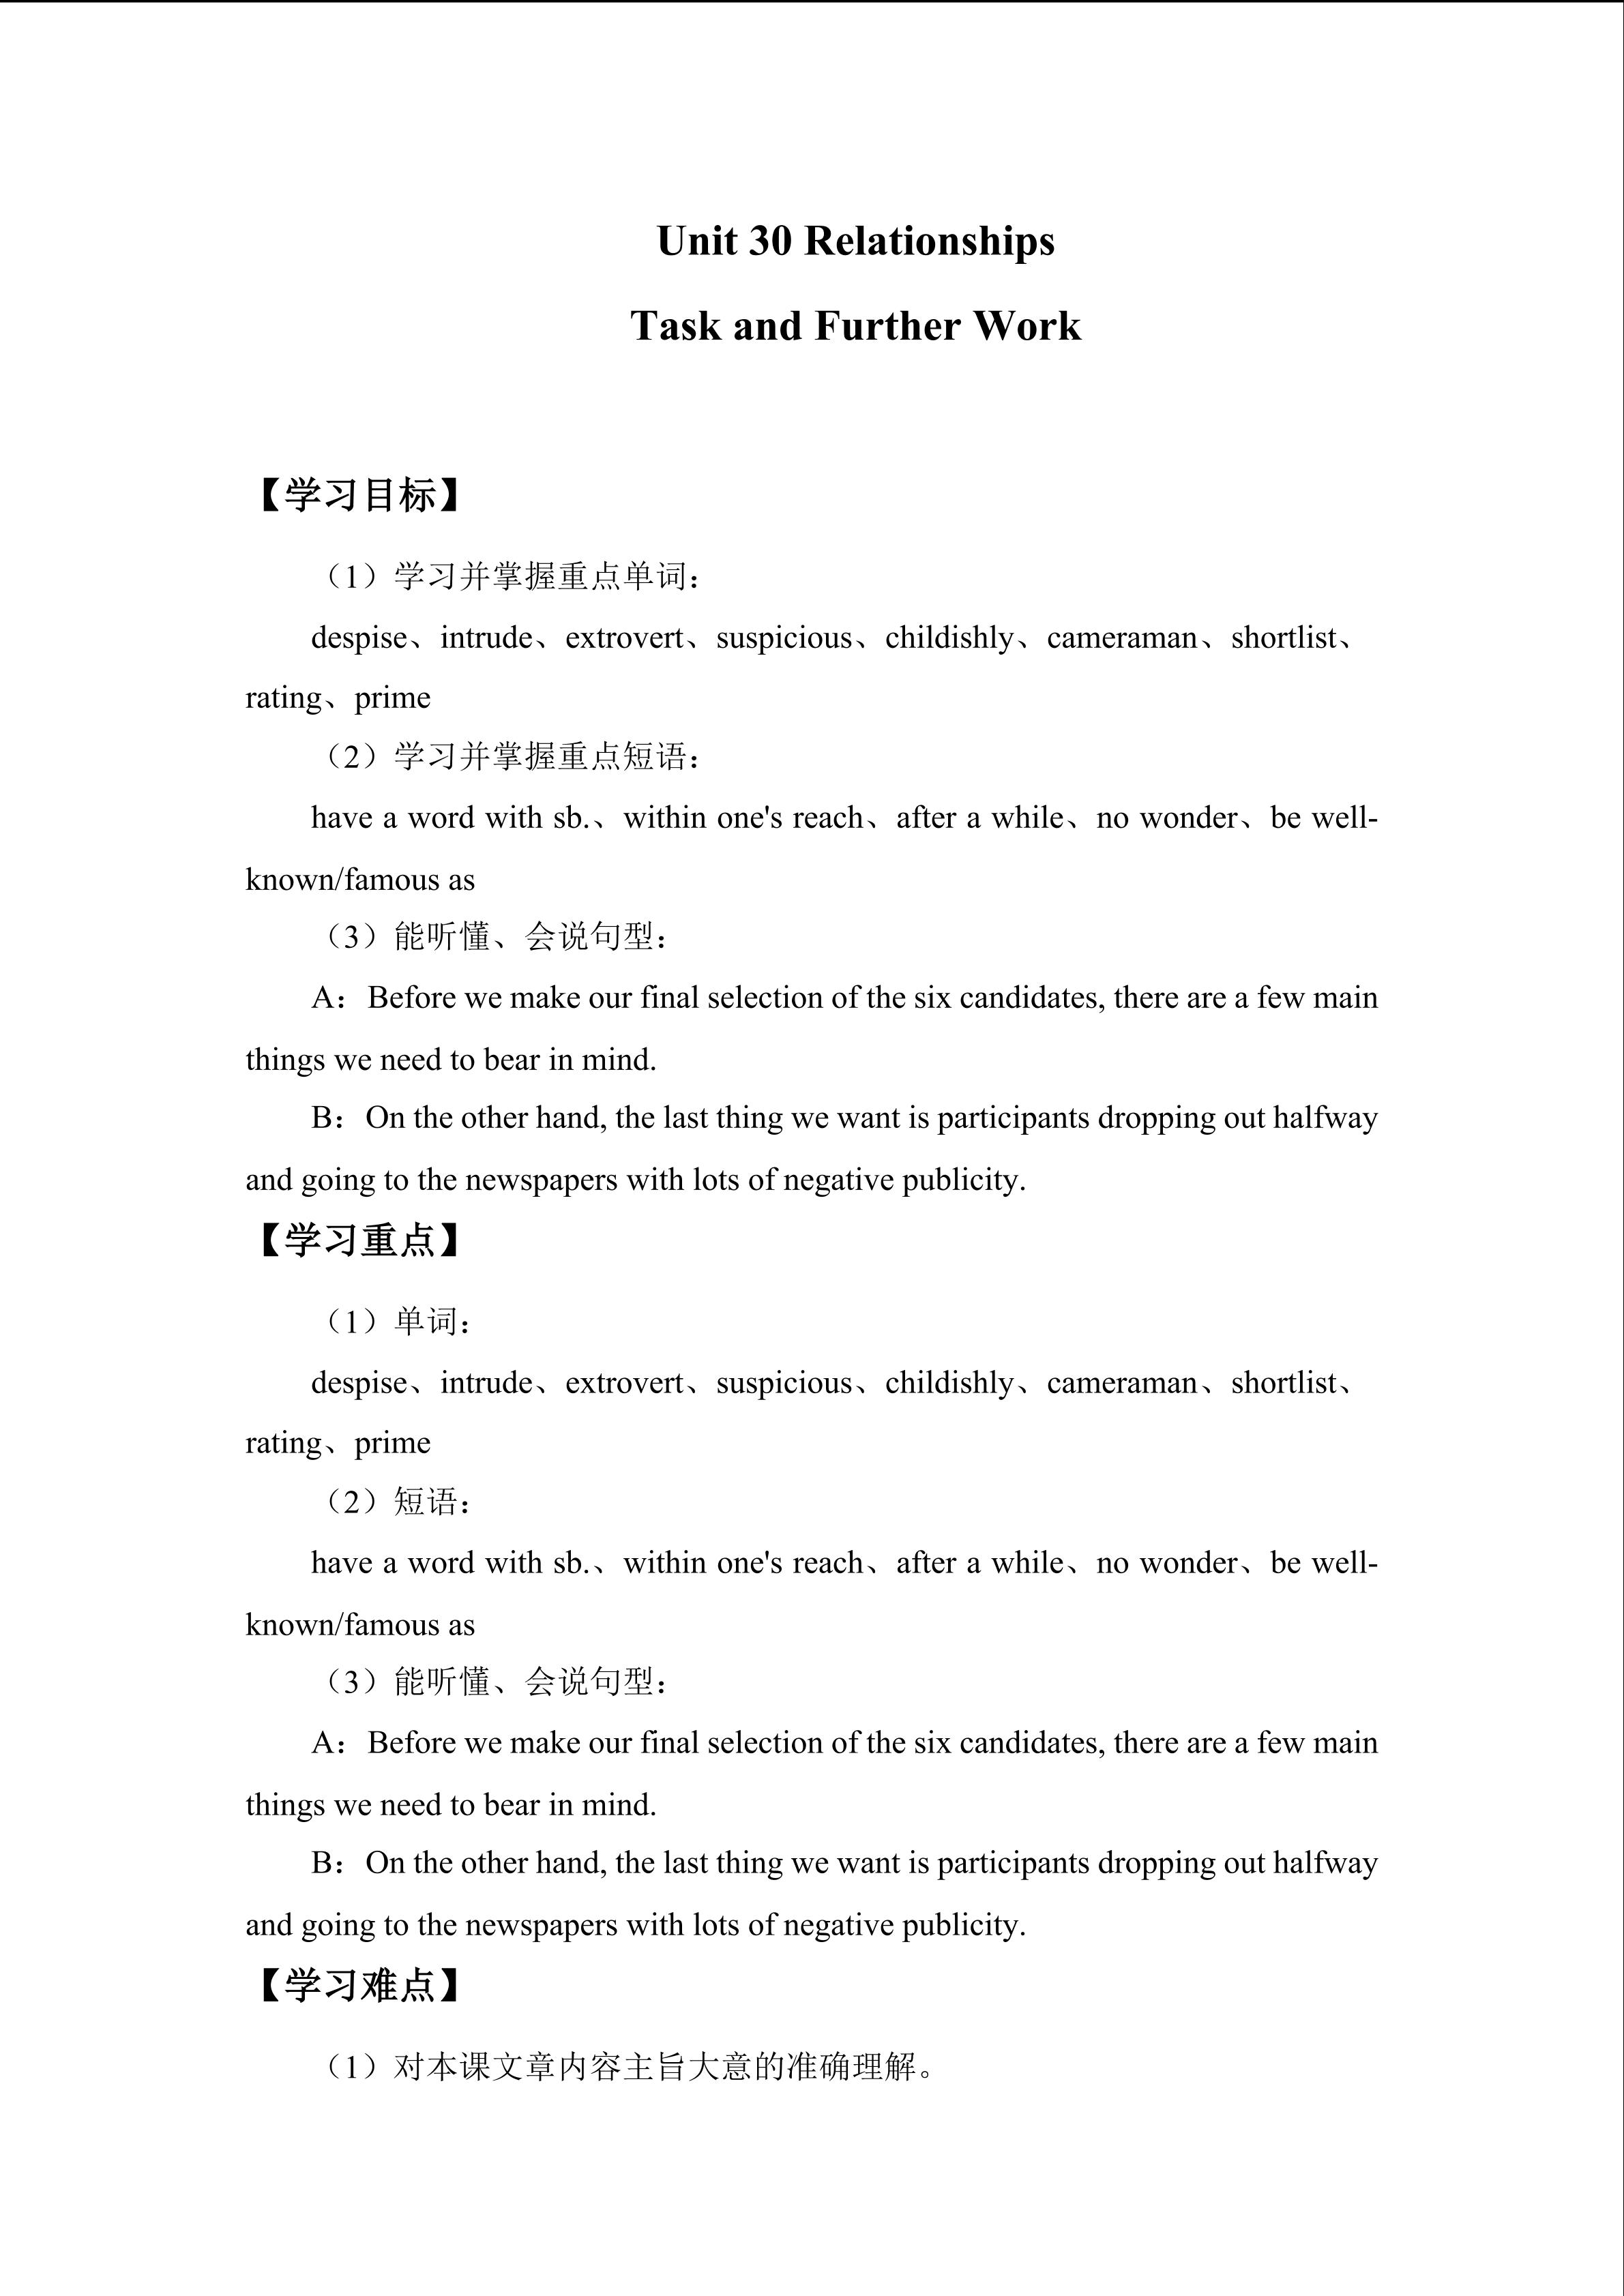 Task and Further Work_学案1